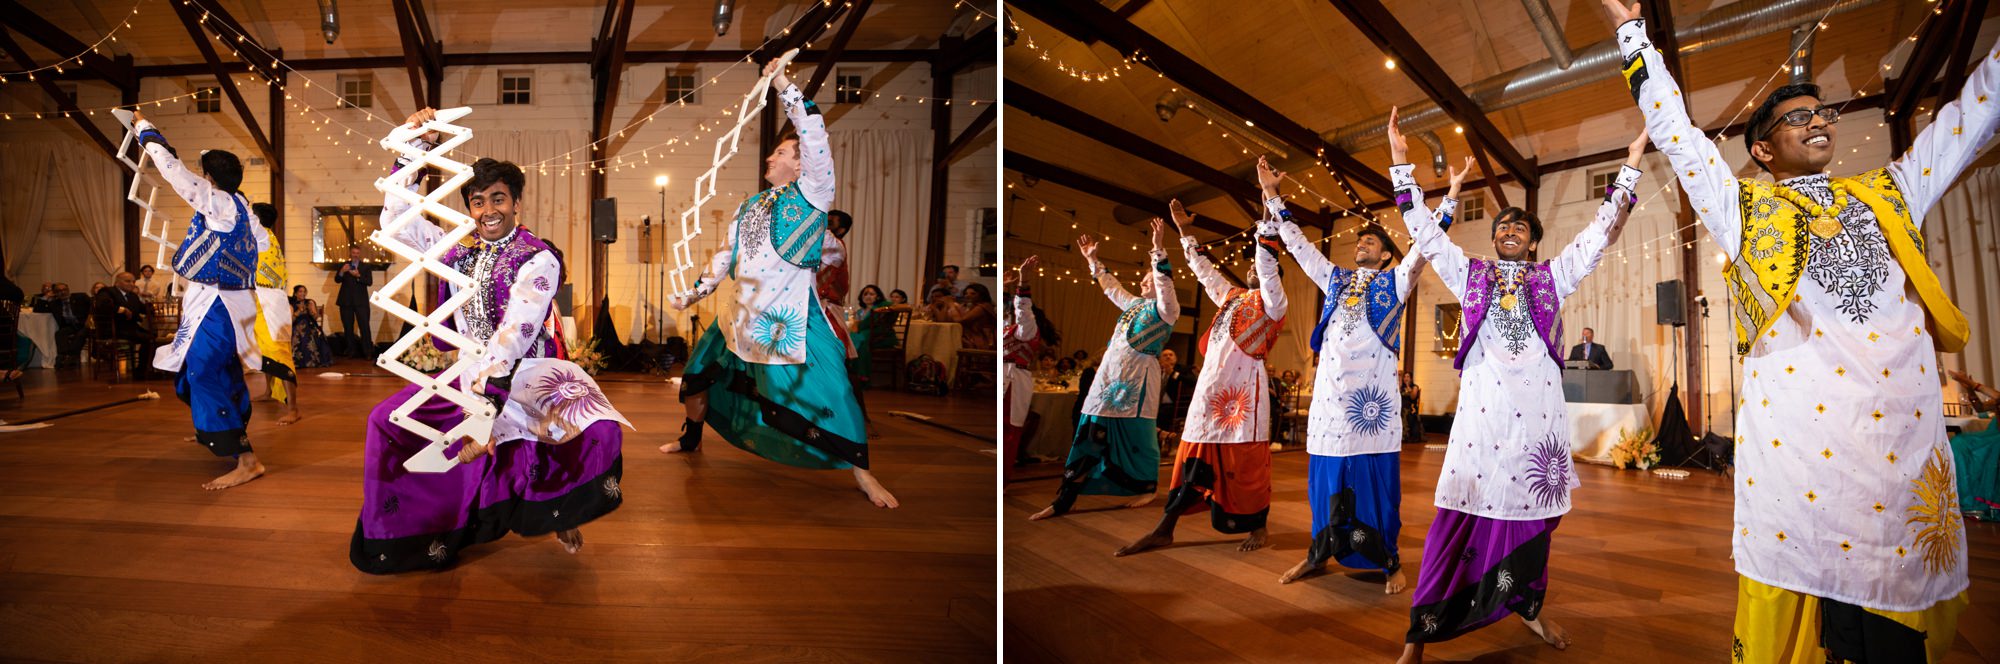 Pippin Hill Farm and Vineyards Indian Wedding Dancers